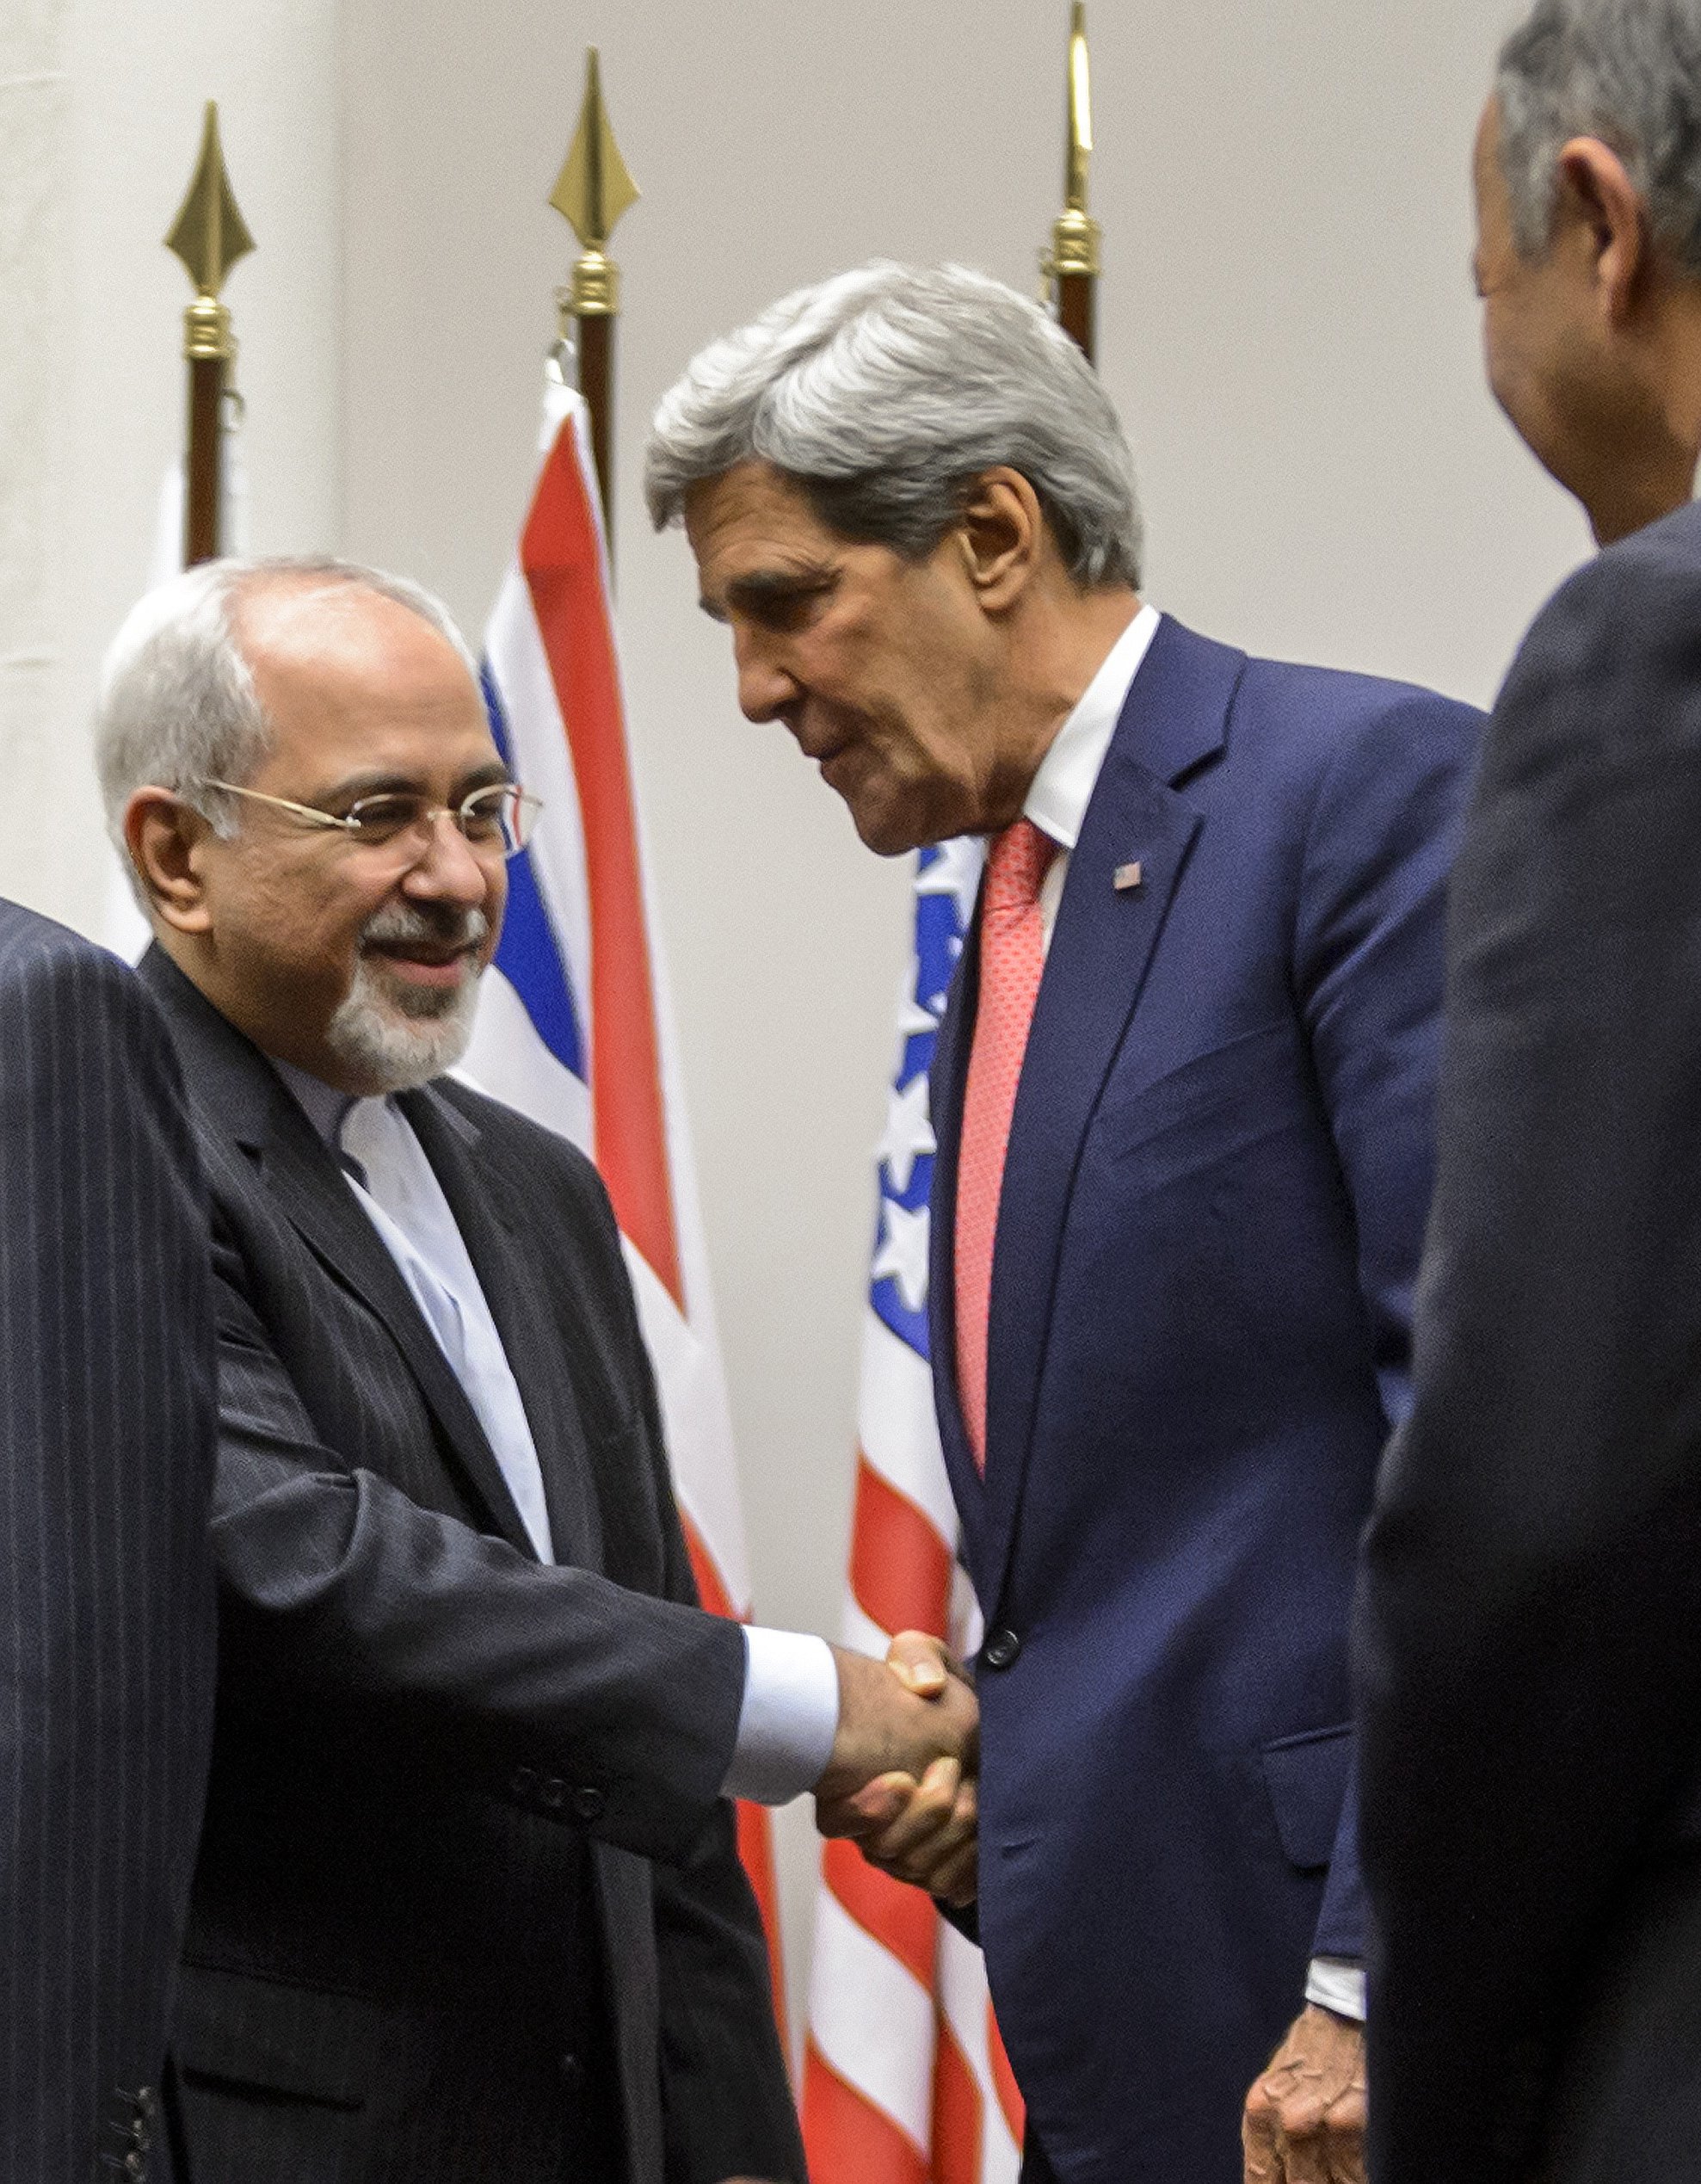 Iranian Foreign Minister Mohammad Javad Zarif (2nd L) shakes hands with US Secretary of State John Kerry as they stand next to French Foreign Minister Laurent Fabius (R) after a statement early on November 24, 2013 in Geneva. (FABRICE COFFRINI/AFP/Getty Images)